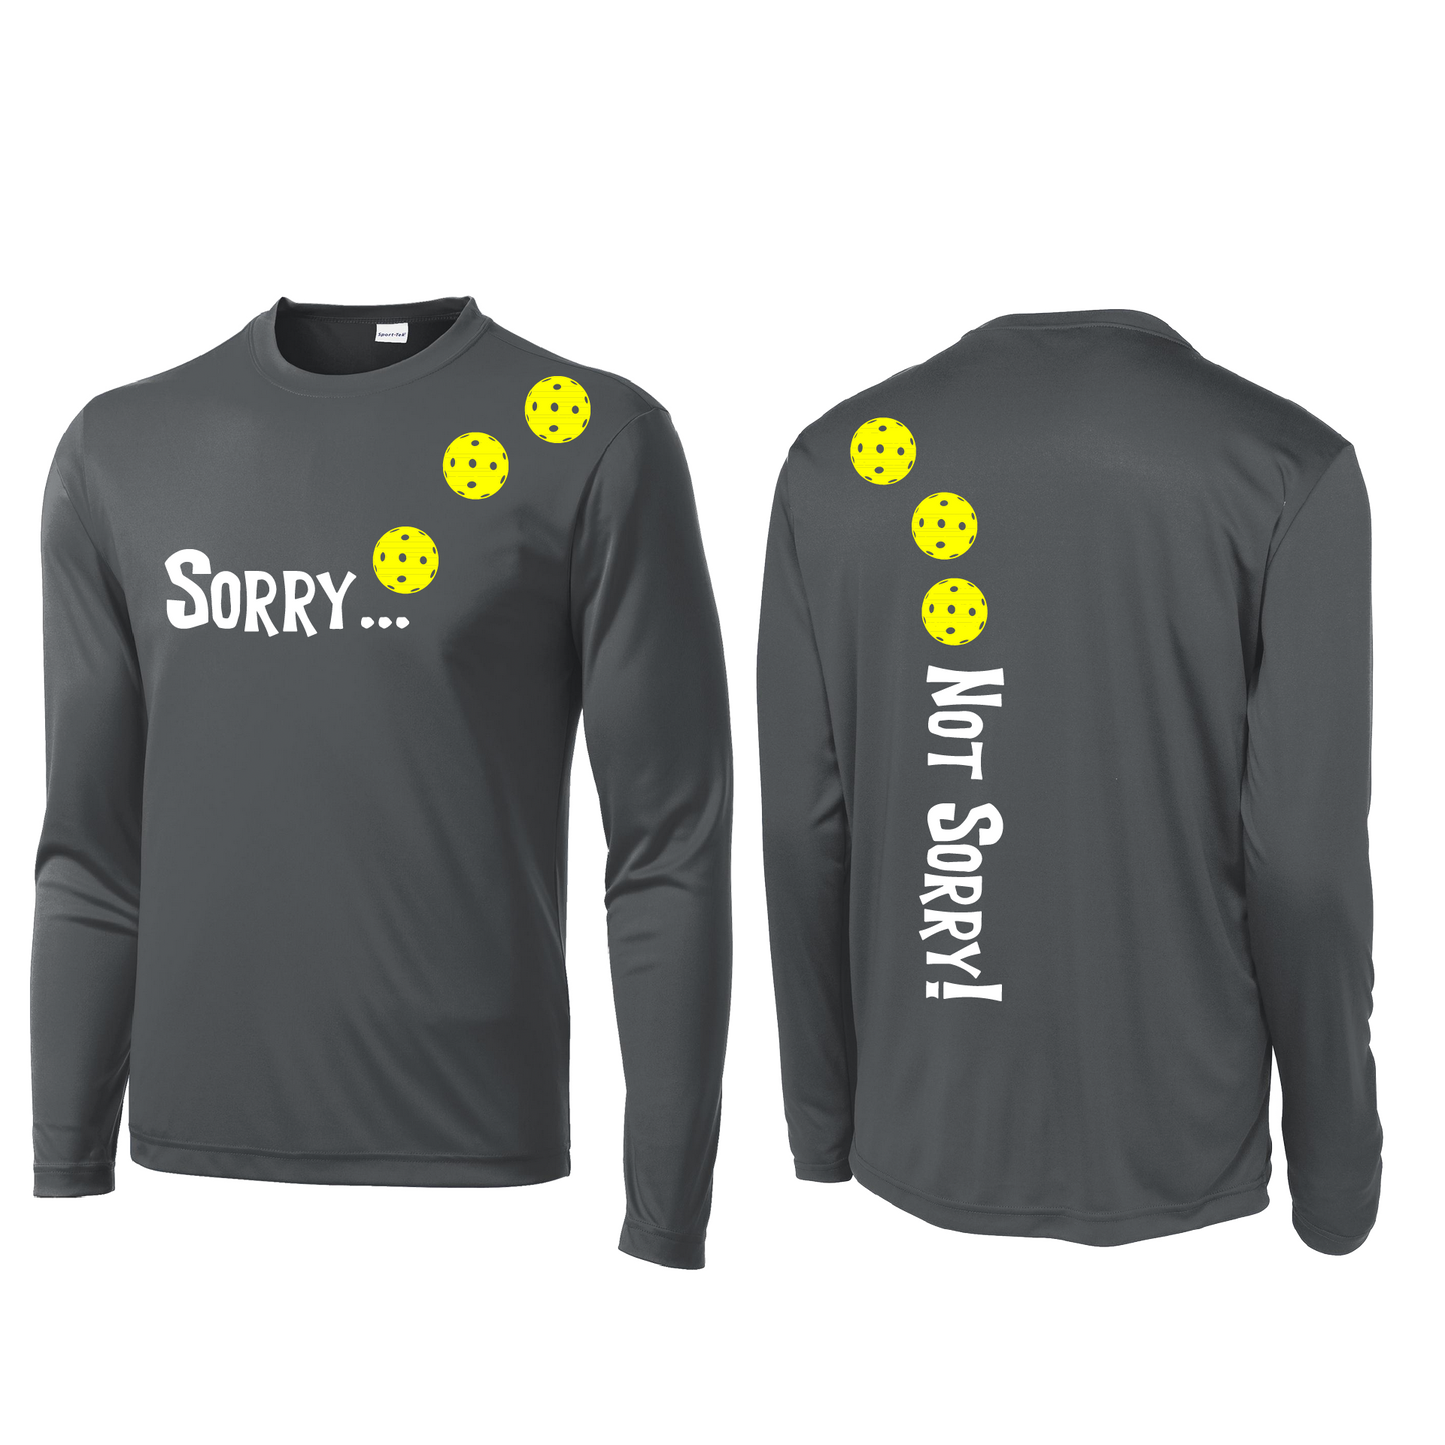 Pickleball Design: Sorry...Not Sorry! with Customizable Ball Color - Choose: Yellow, White or Cyan.  Men's Styles: Long-Sleeve .  Shirts are lightweight, roomy and highly breathable. These moisture-wicking shirts are designed for athletic performance. They feature PosiCharge technology to lock in color and prevent logos from fading. Removable tag and set-in sleeves for comfort.